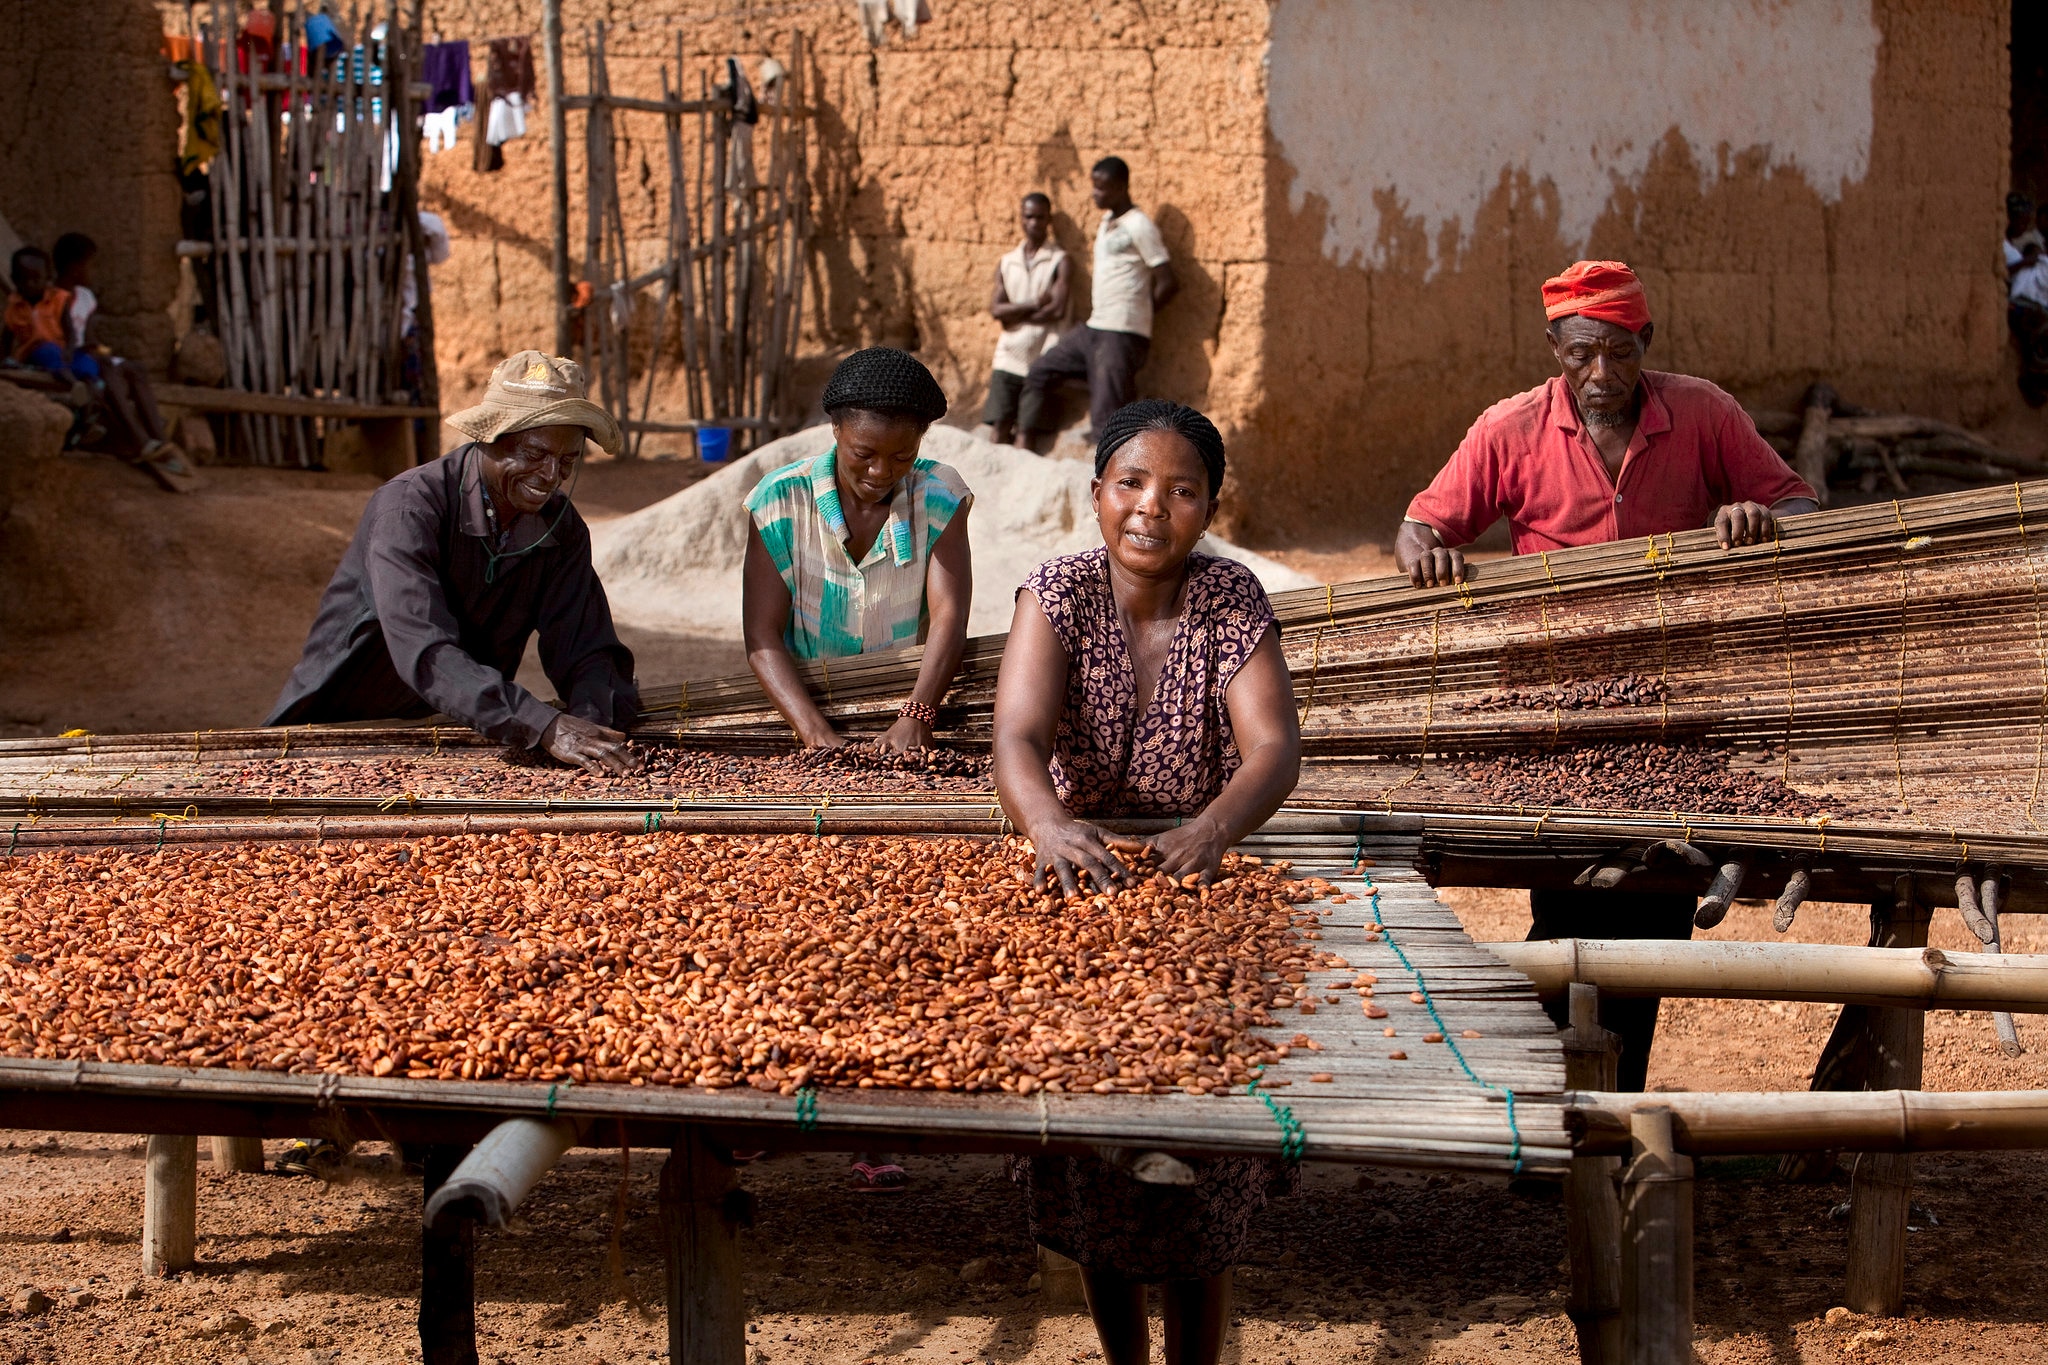 Image of cocoa farmers and cocoa beans